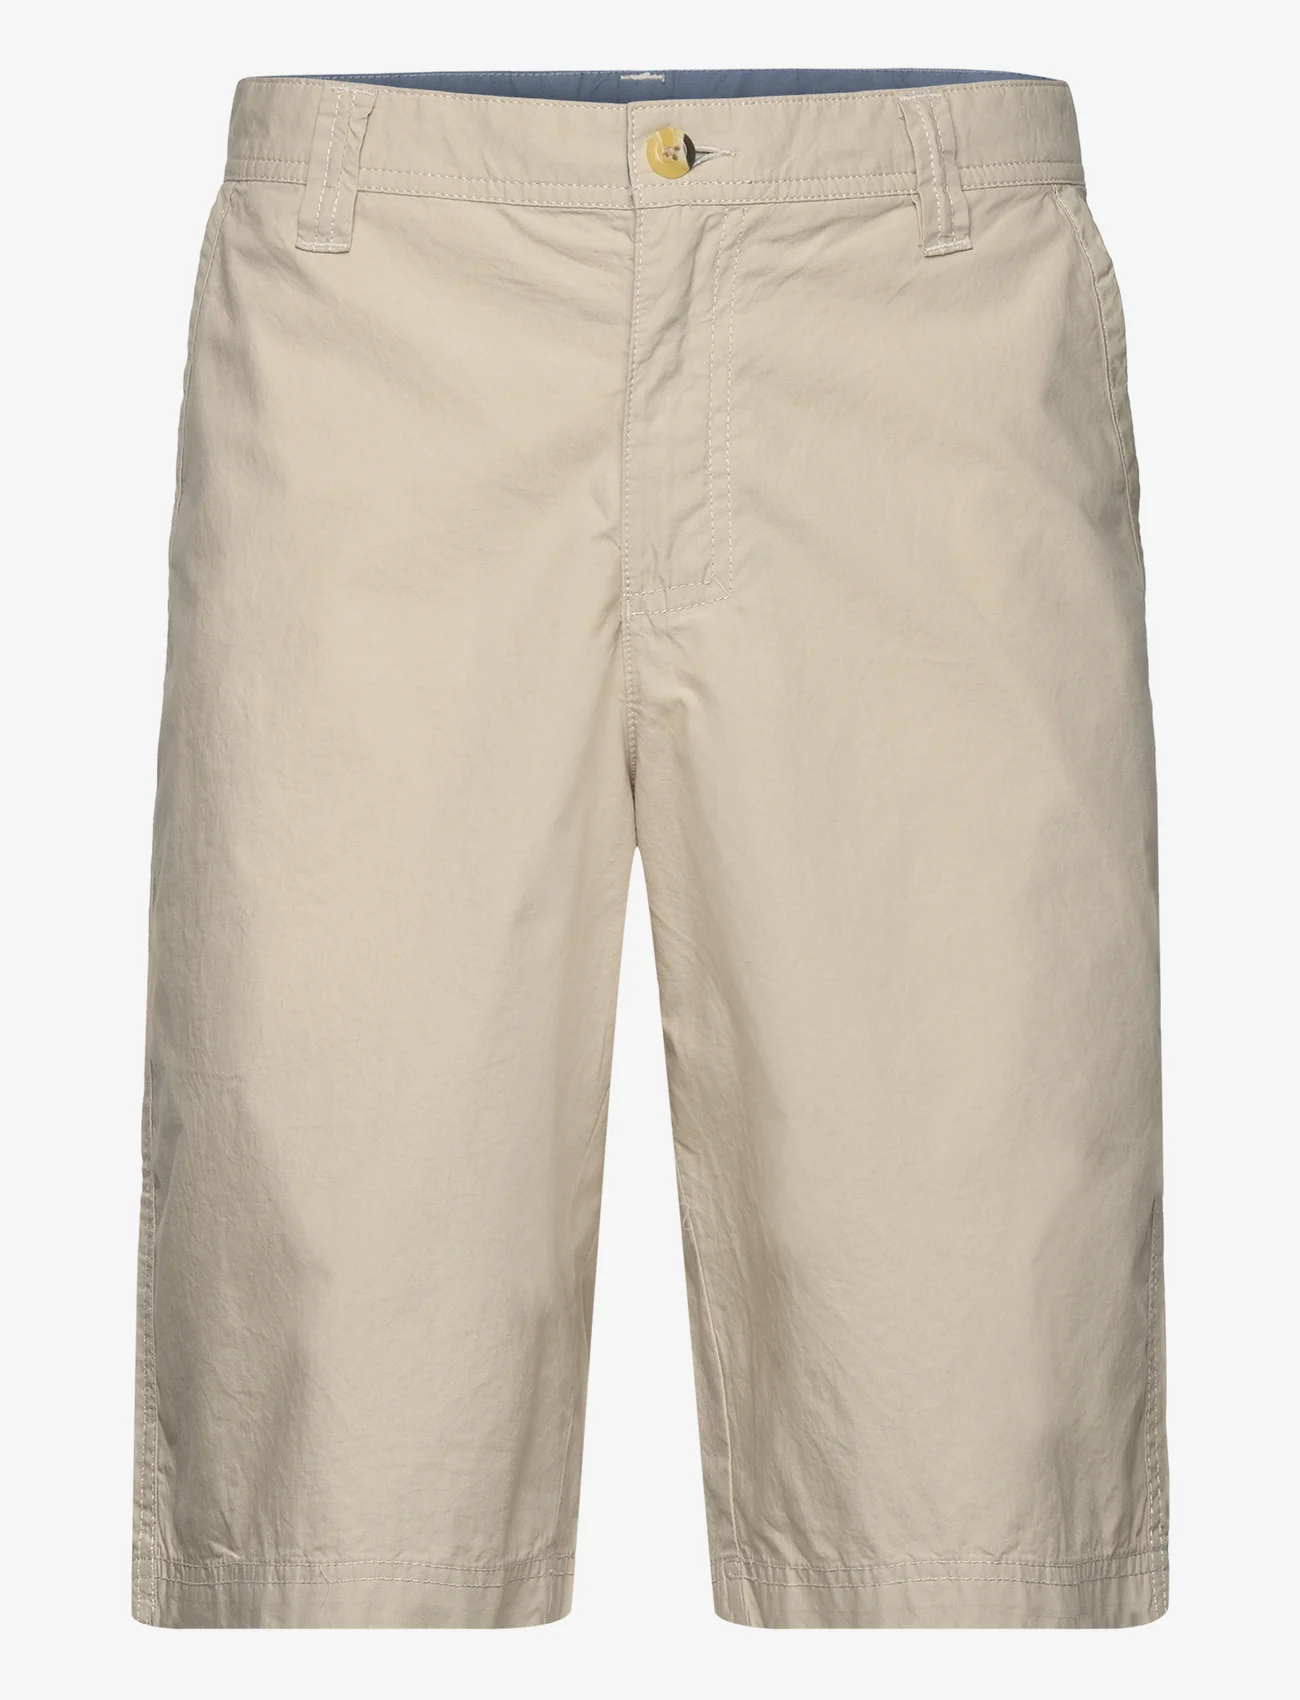 Columbia Sportswear - Washed Out Short - turshorts - fossil - 0